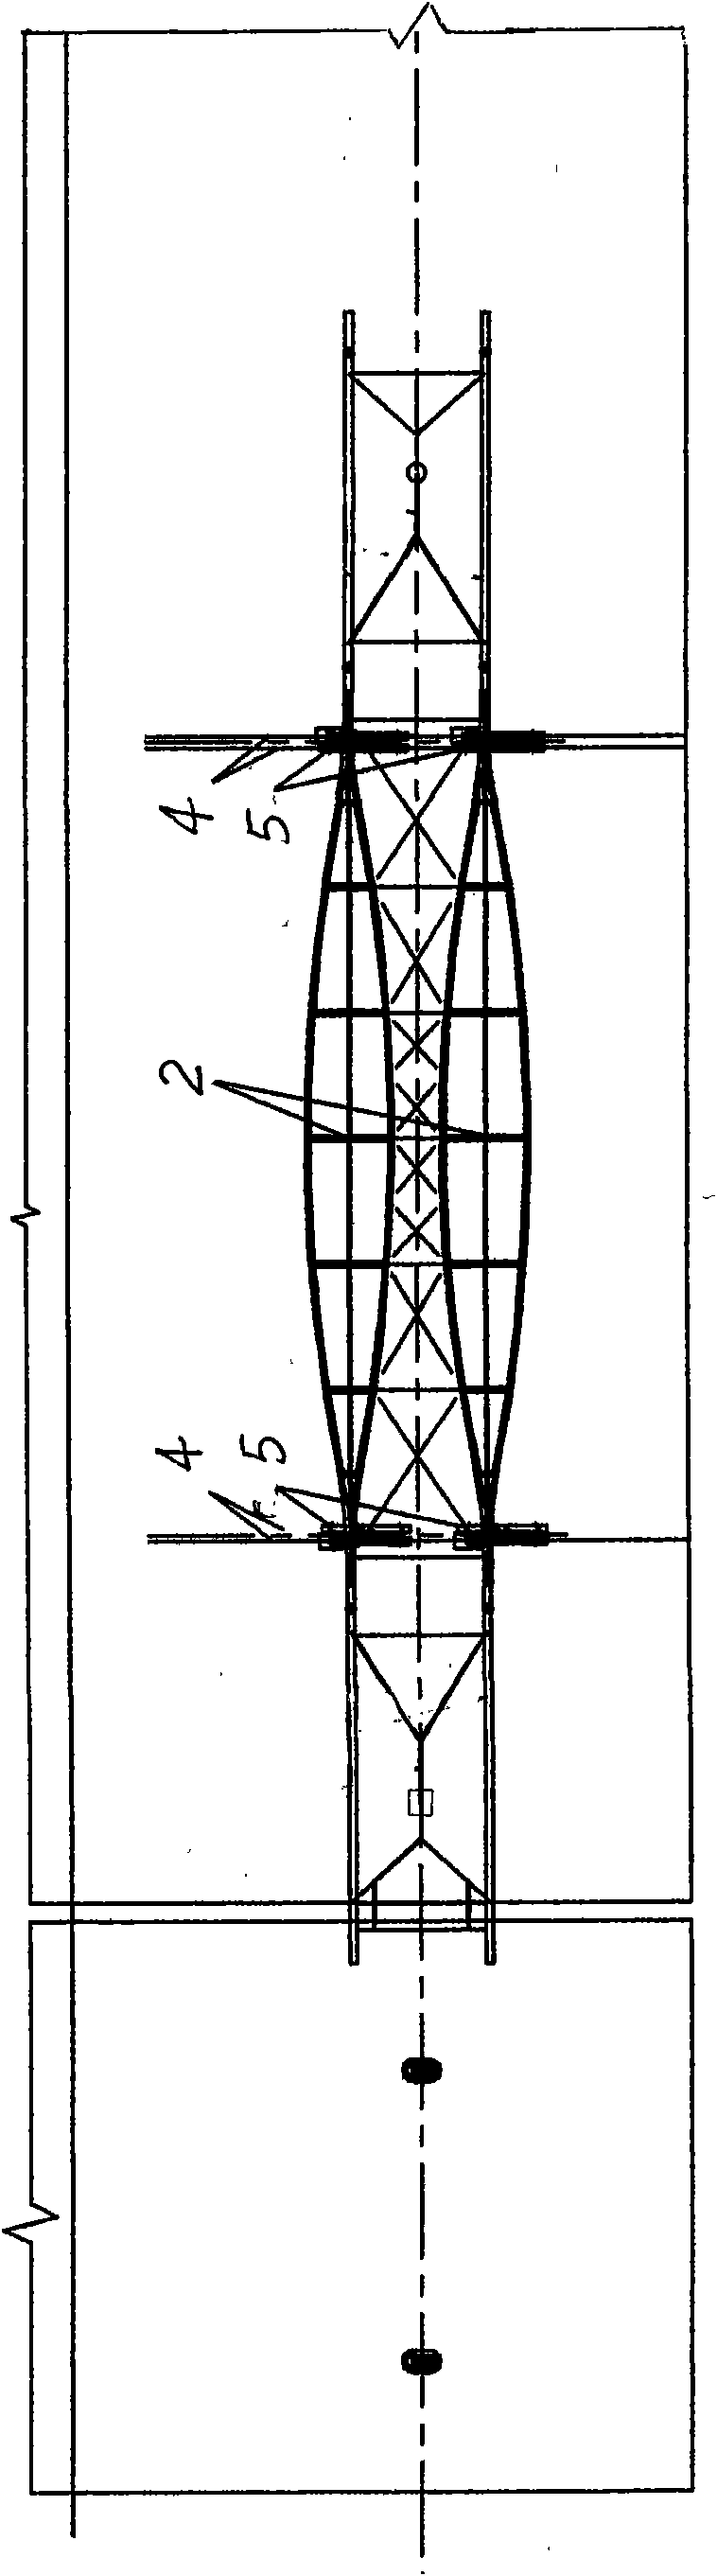 Large-sized steel structure integral translation and hoisting combination construction process